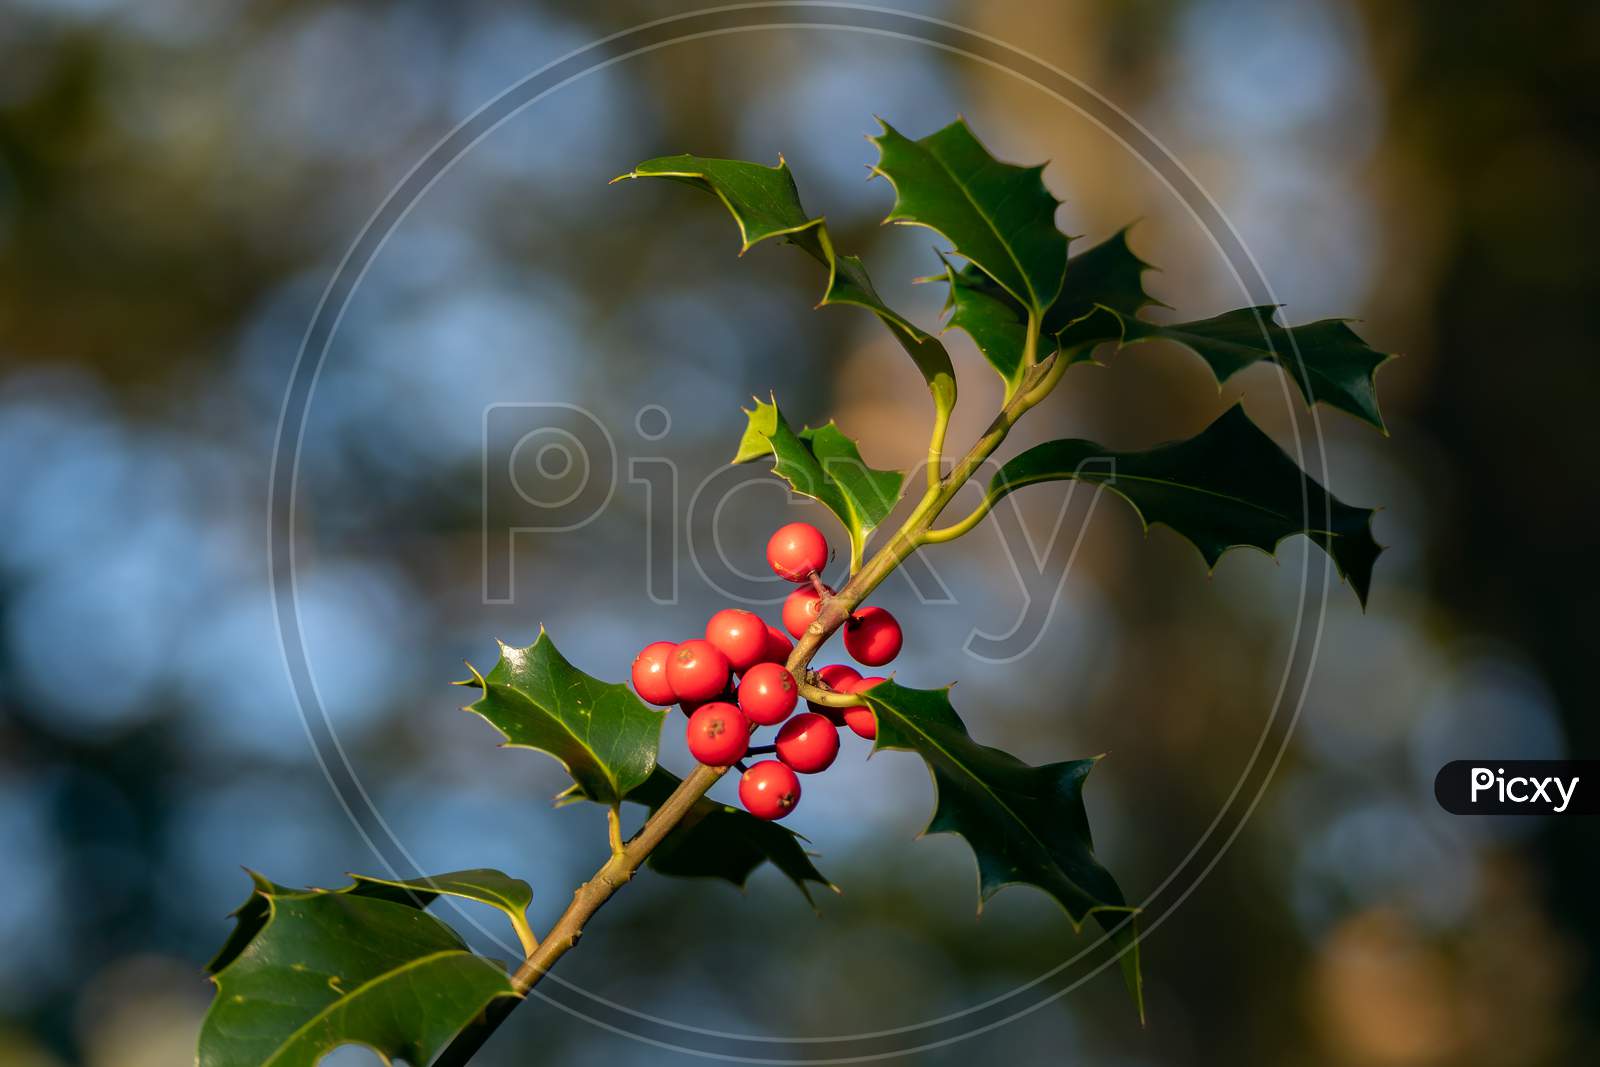 Holly (Ilex) Bough With Red Berries In Autumn